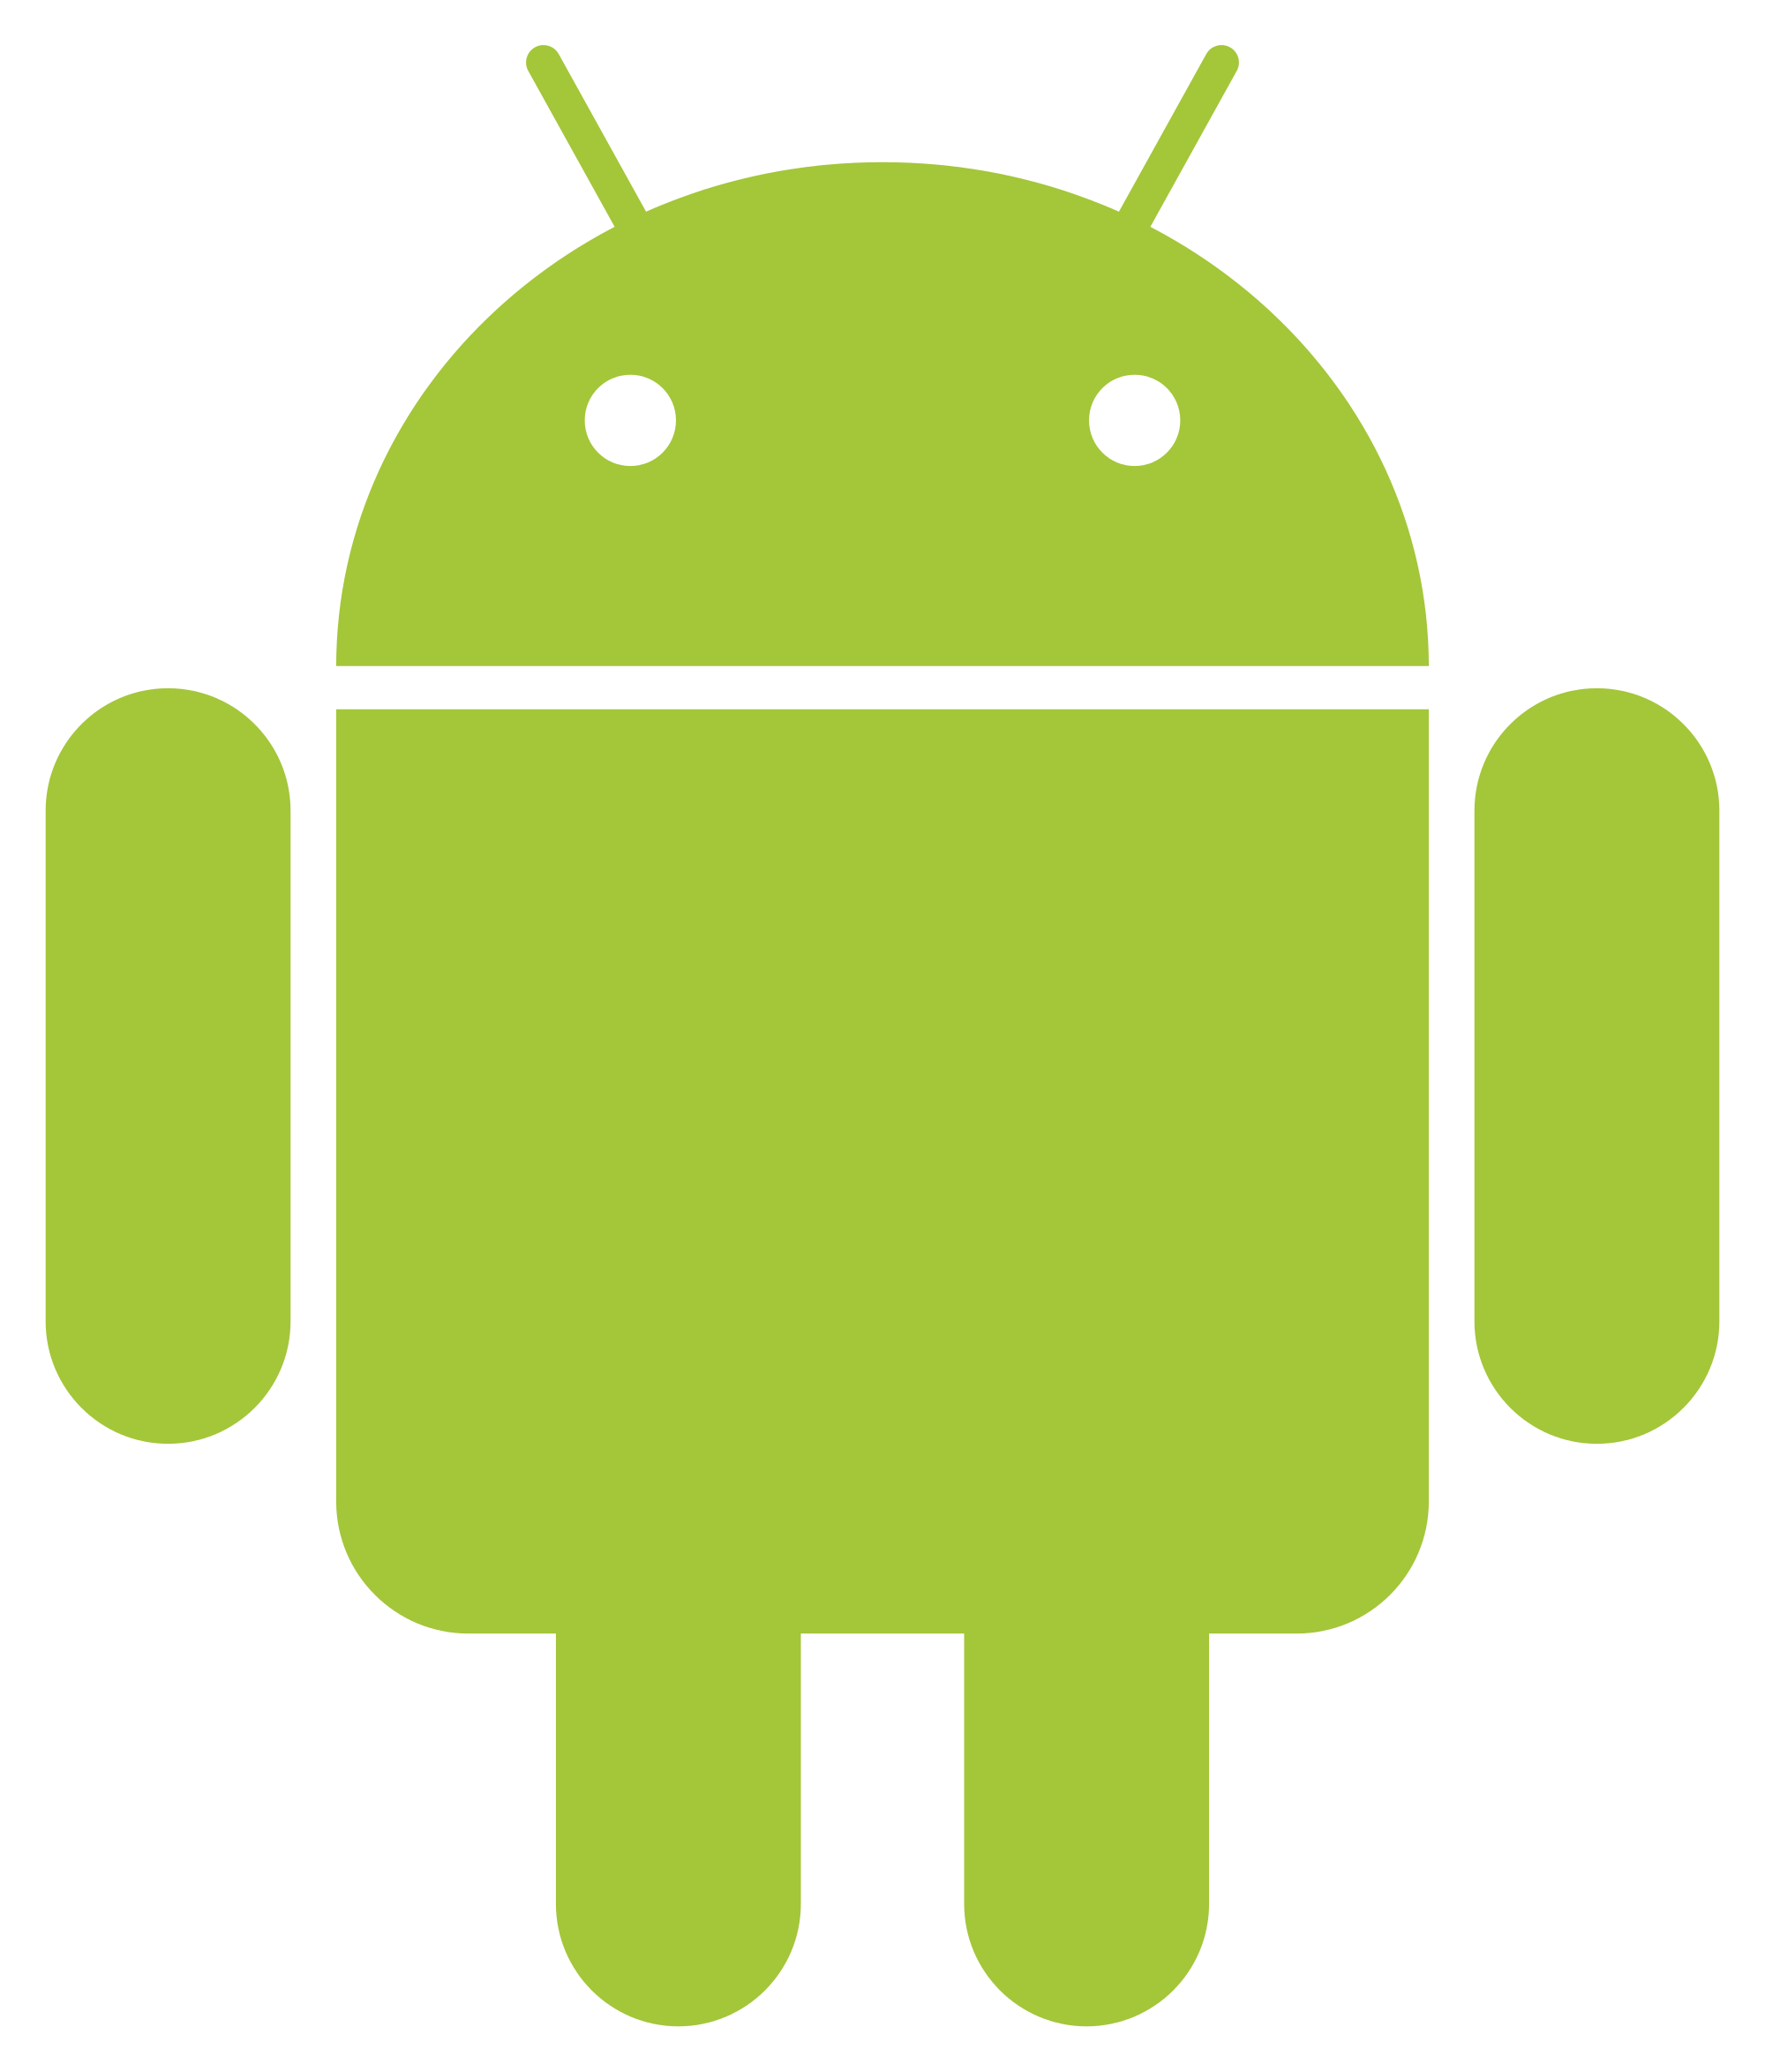 green android logo image